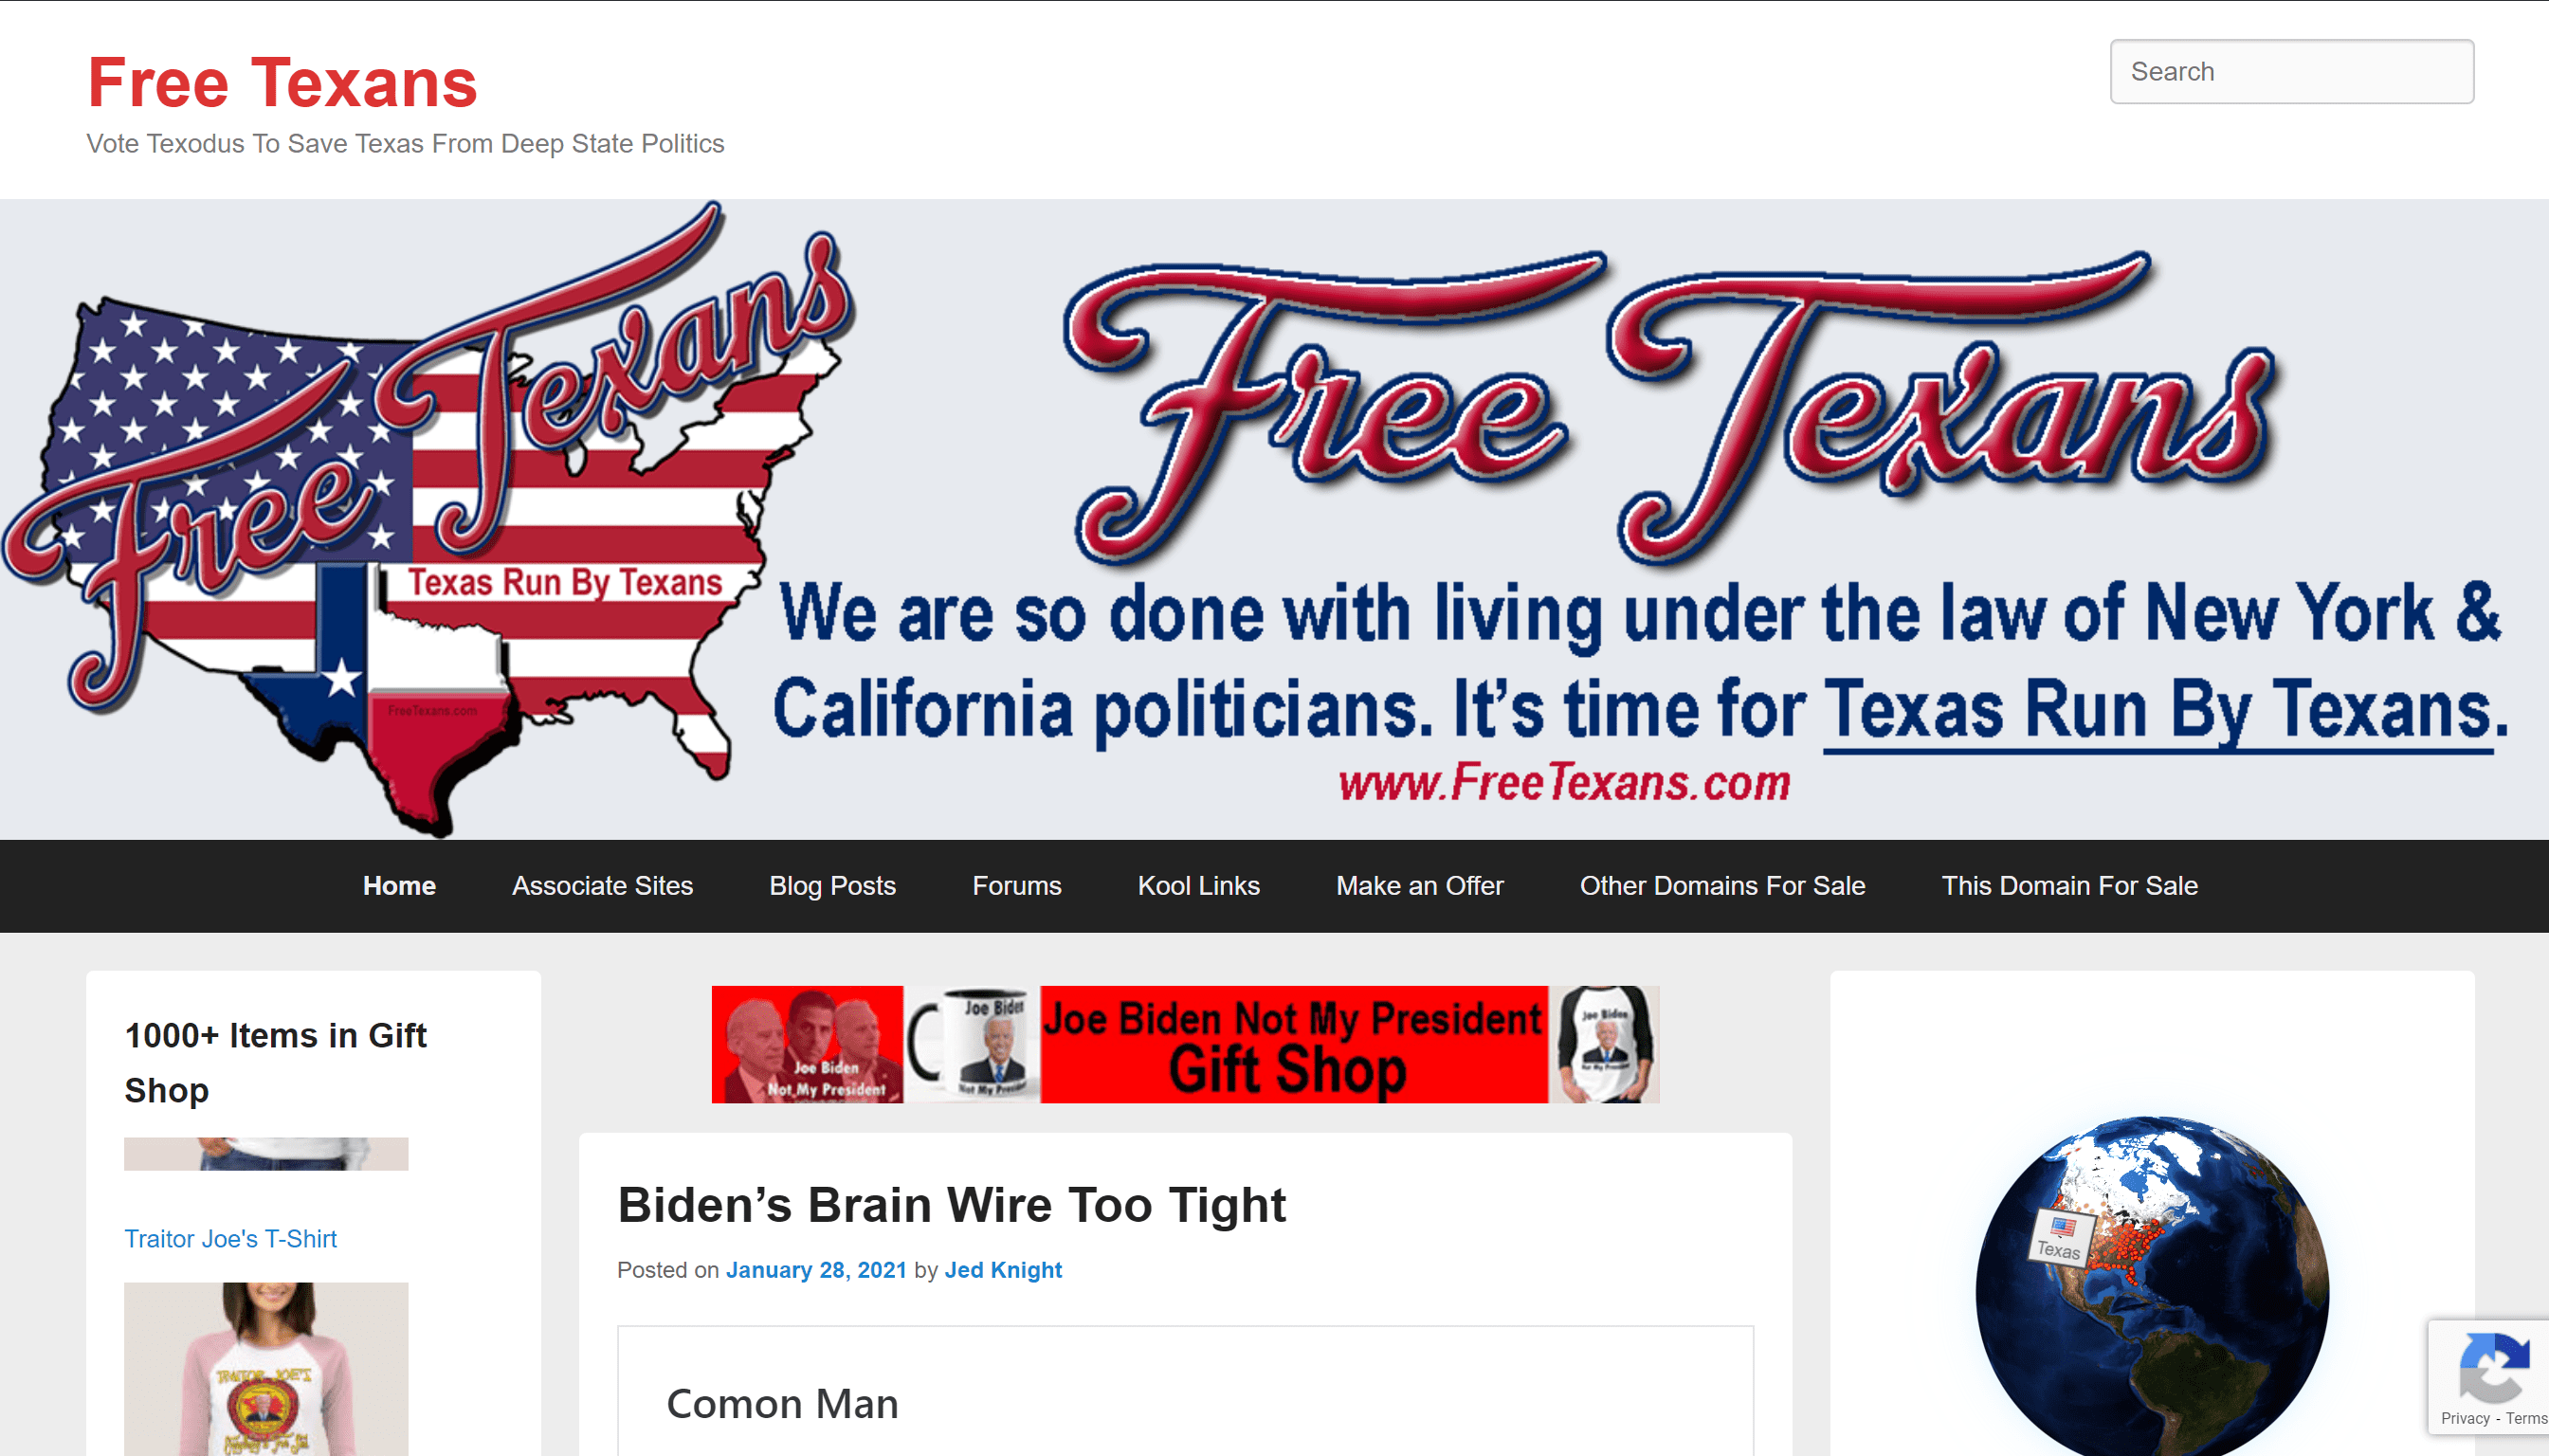 Free Texan’s Web Site Gets a Freshen Up